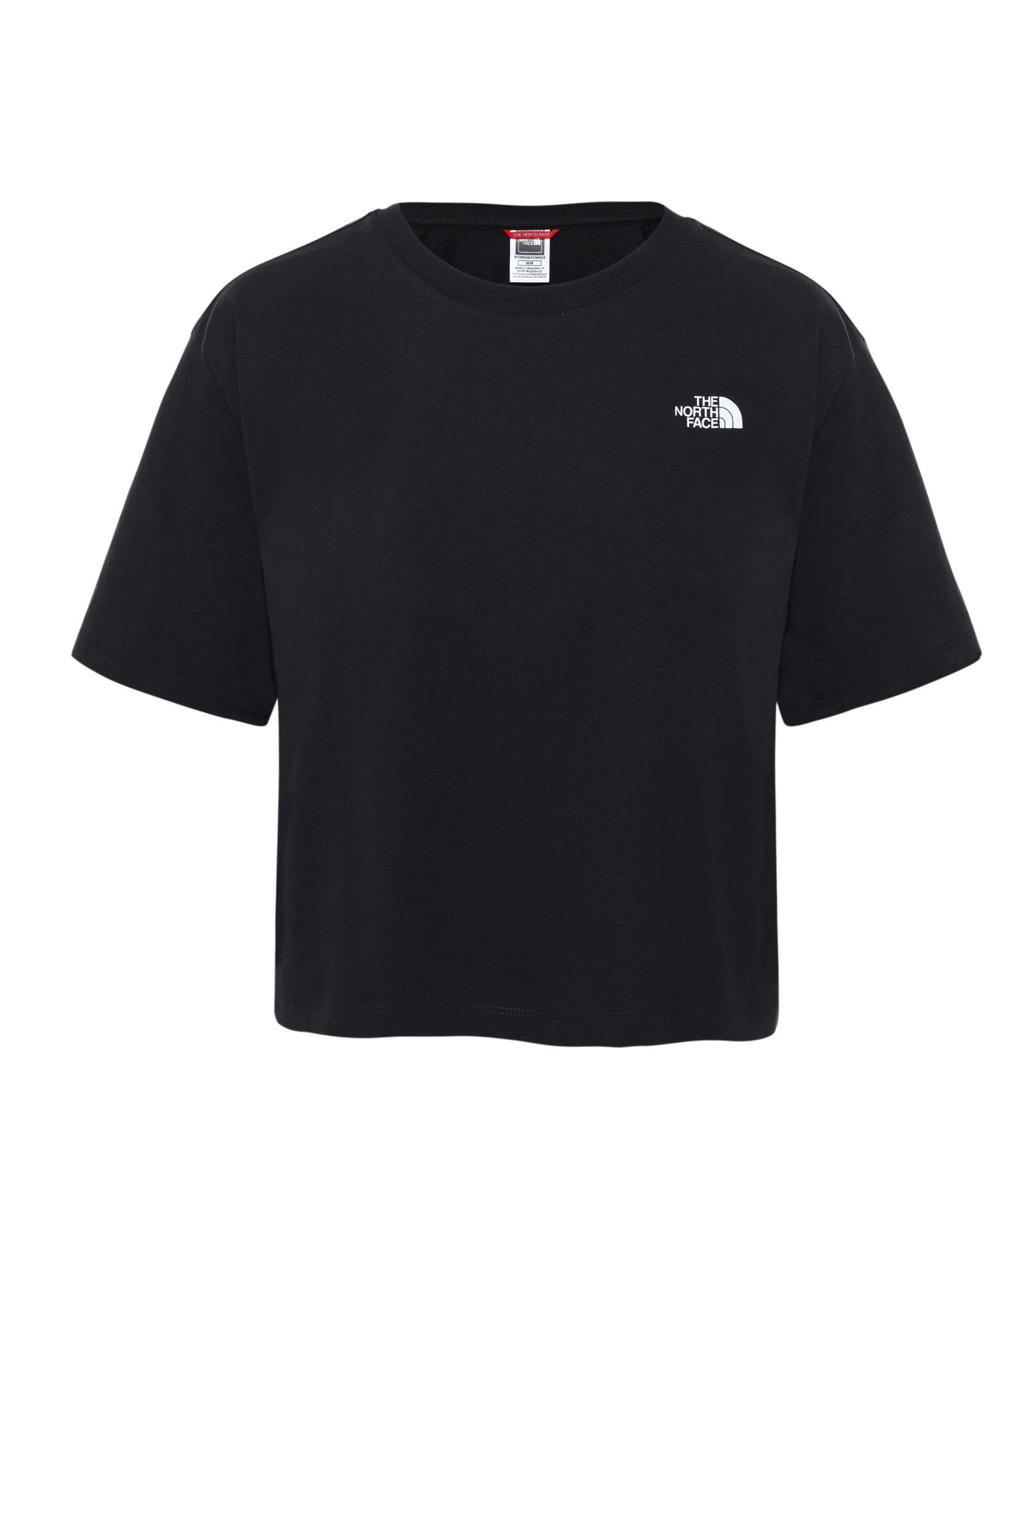 The North Face T-shirt Simple Dome met logo zwart